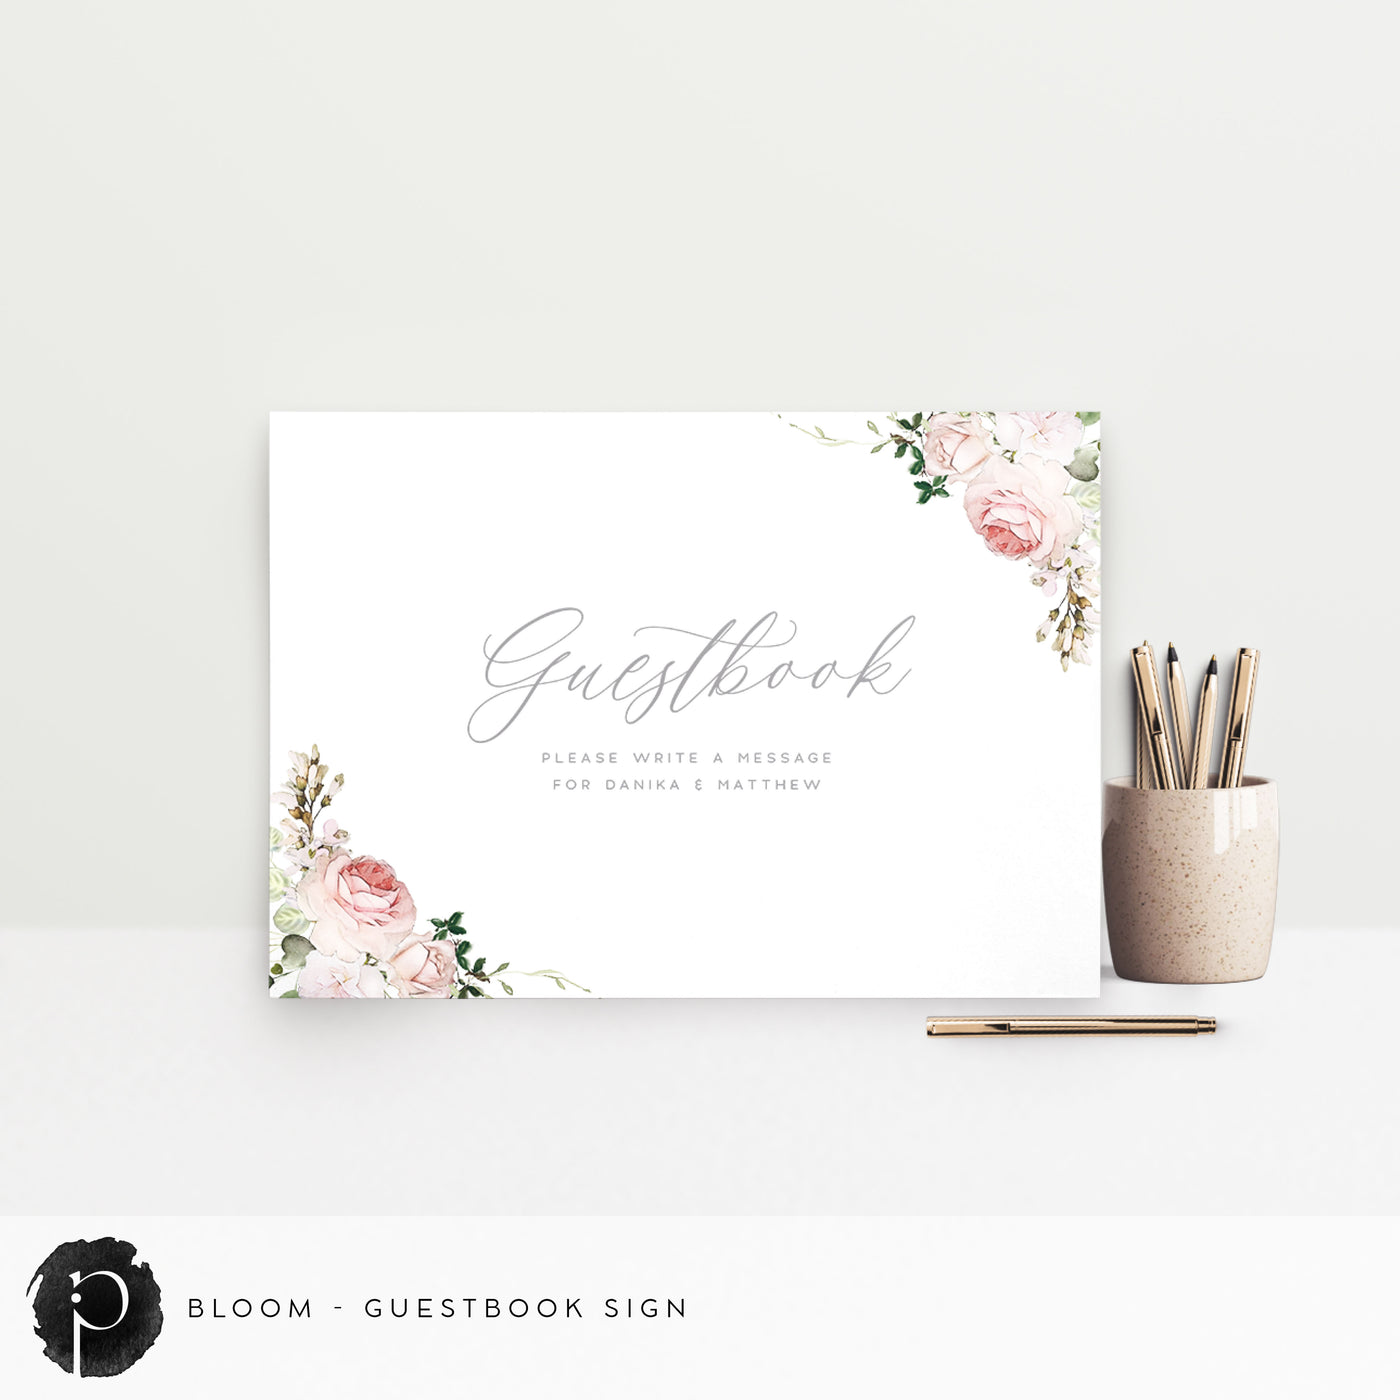 Bloom - Guestbook Sign